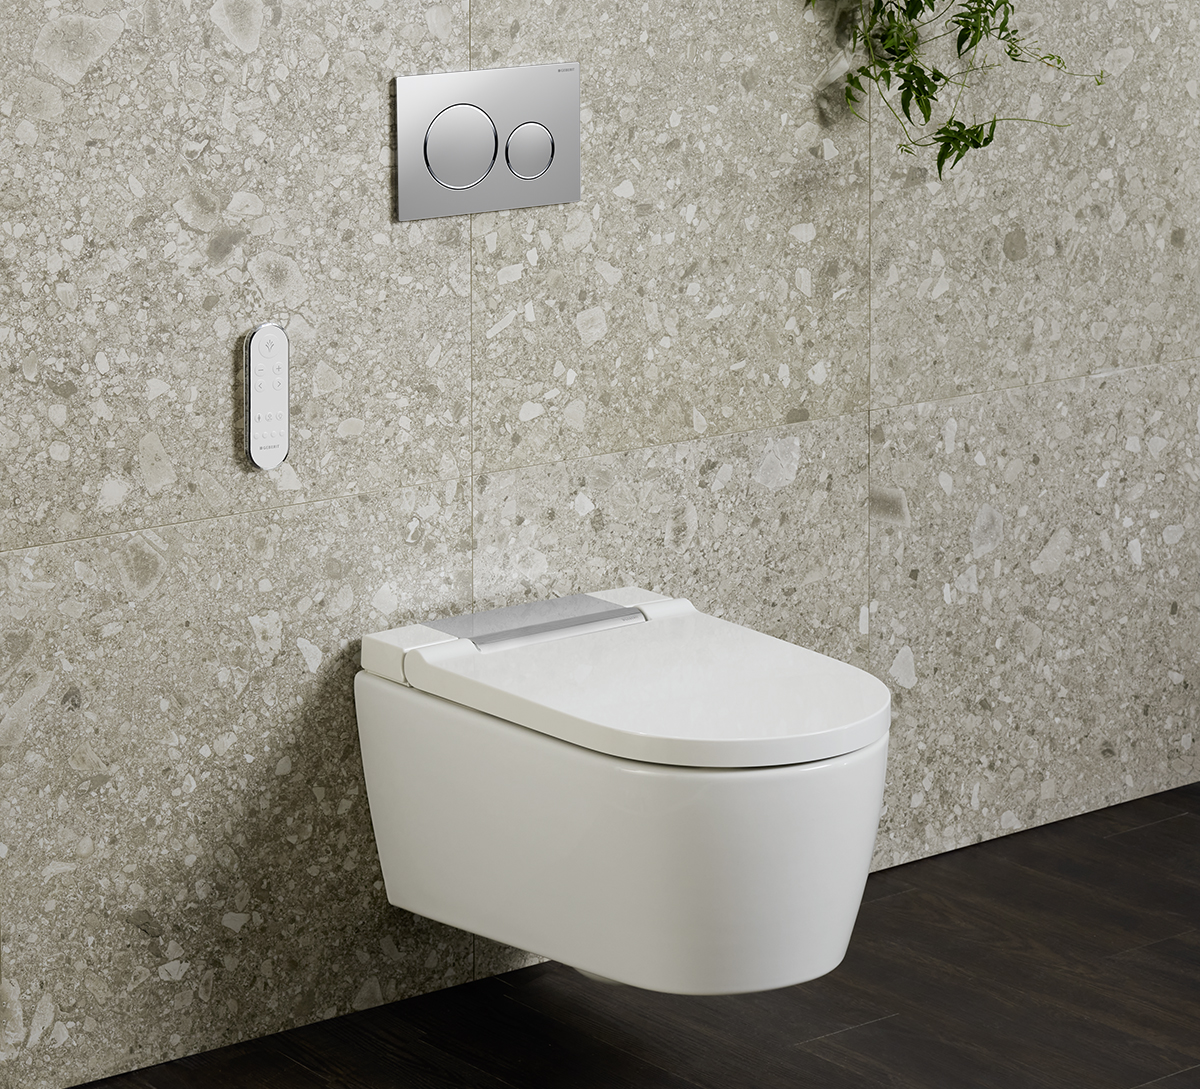 squarerooms bsg geberit showroom national day promotion 2022 toilet bathroom shopping upgrade concealed cistern wall hung mounted wc flush plate minimalist modern design